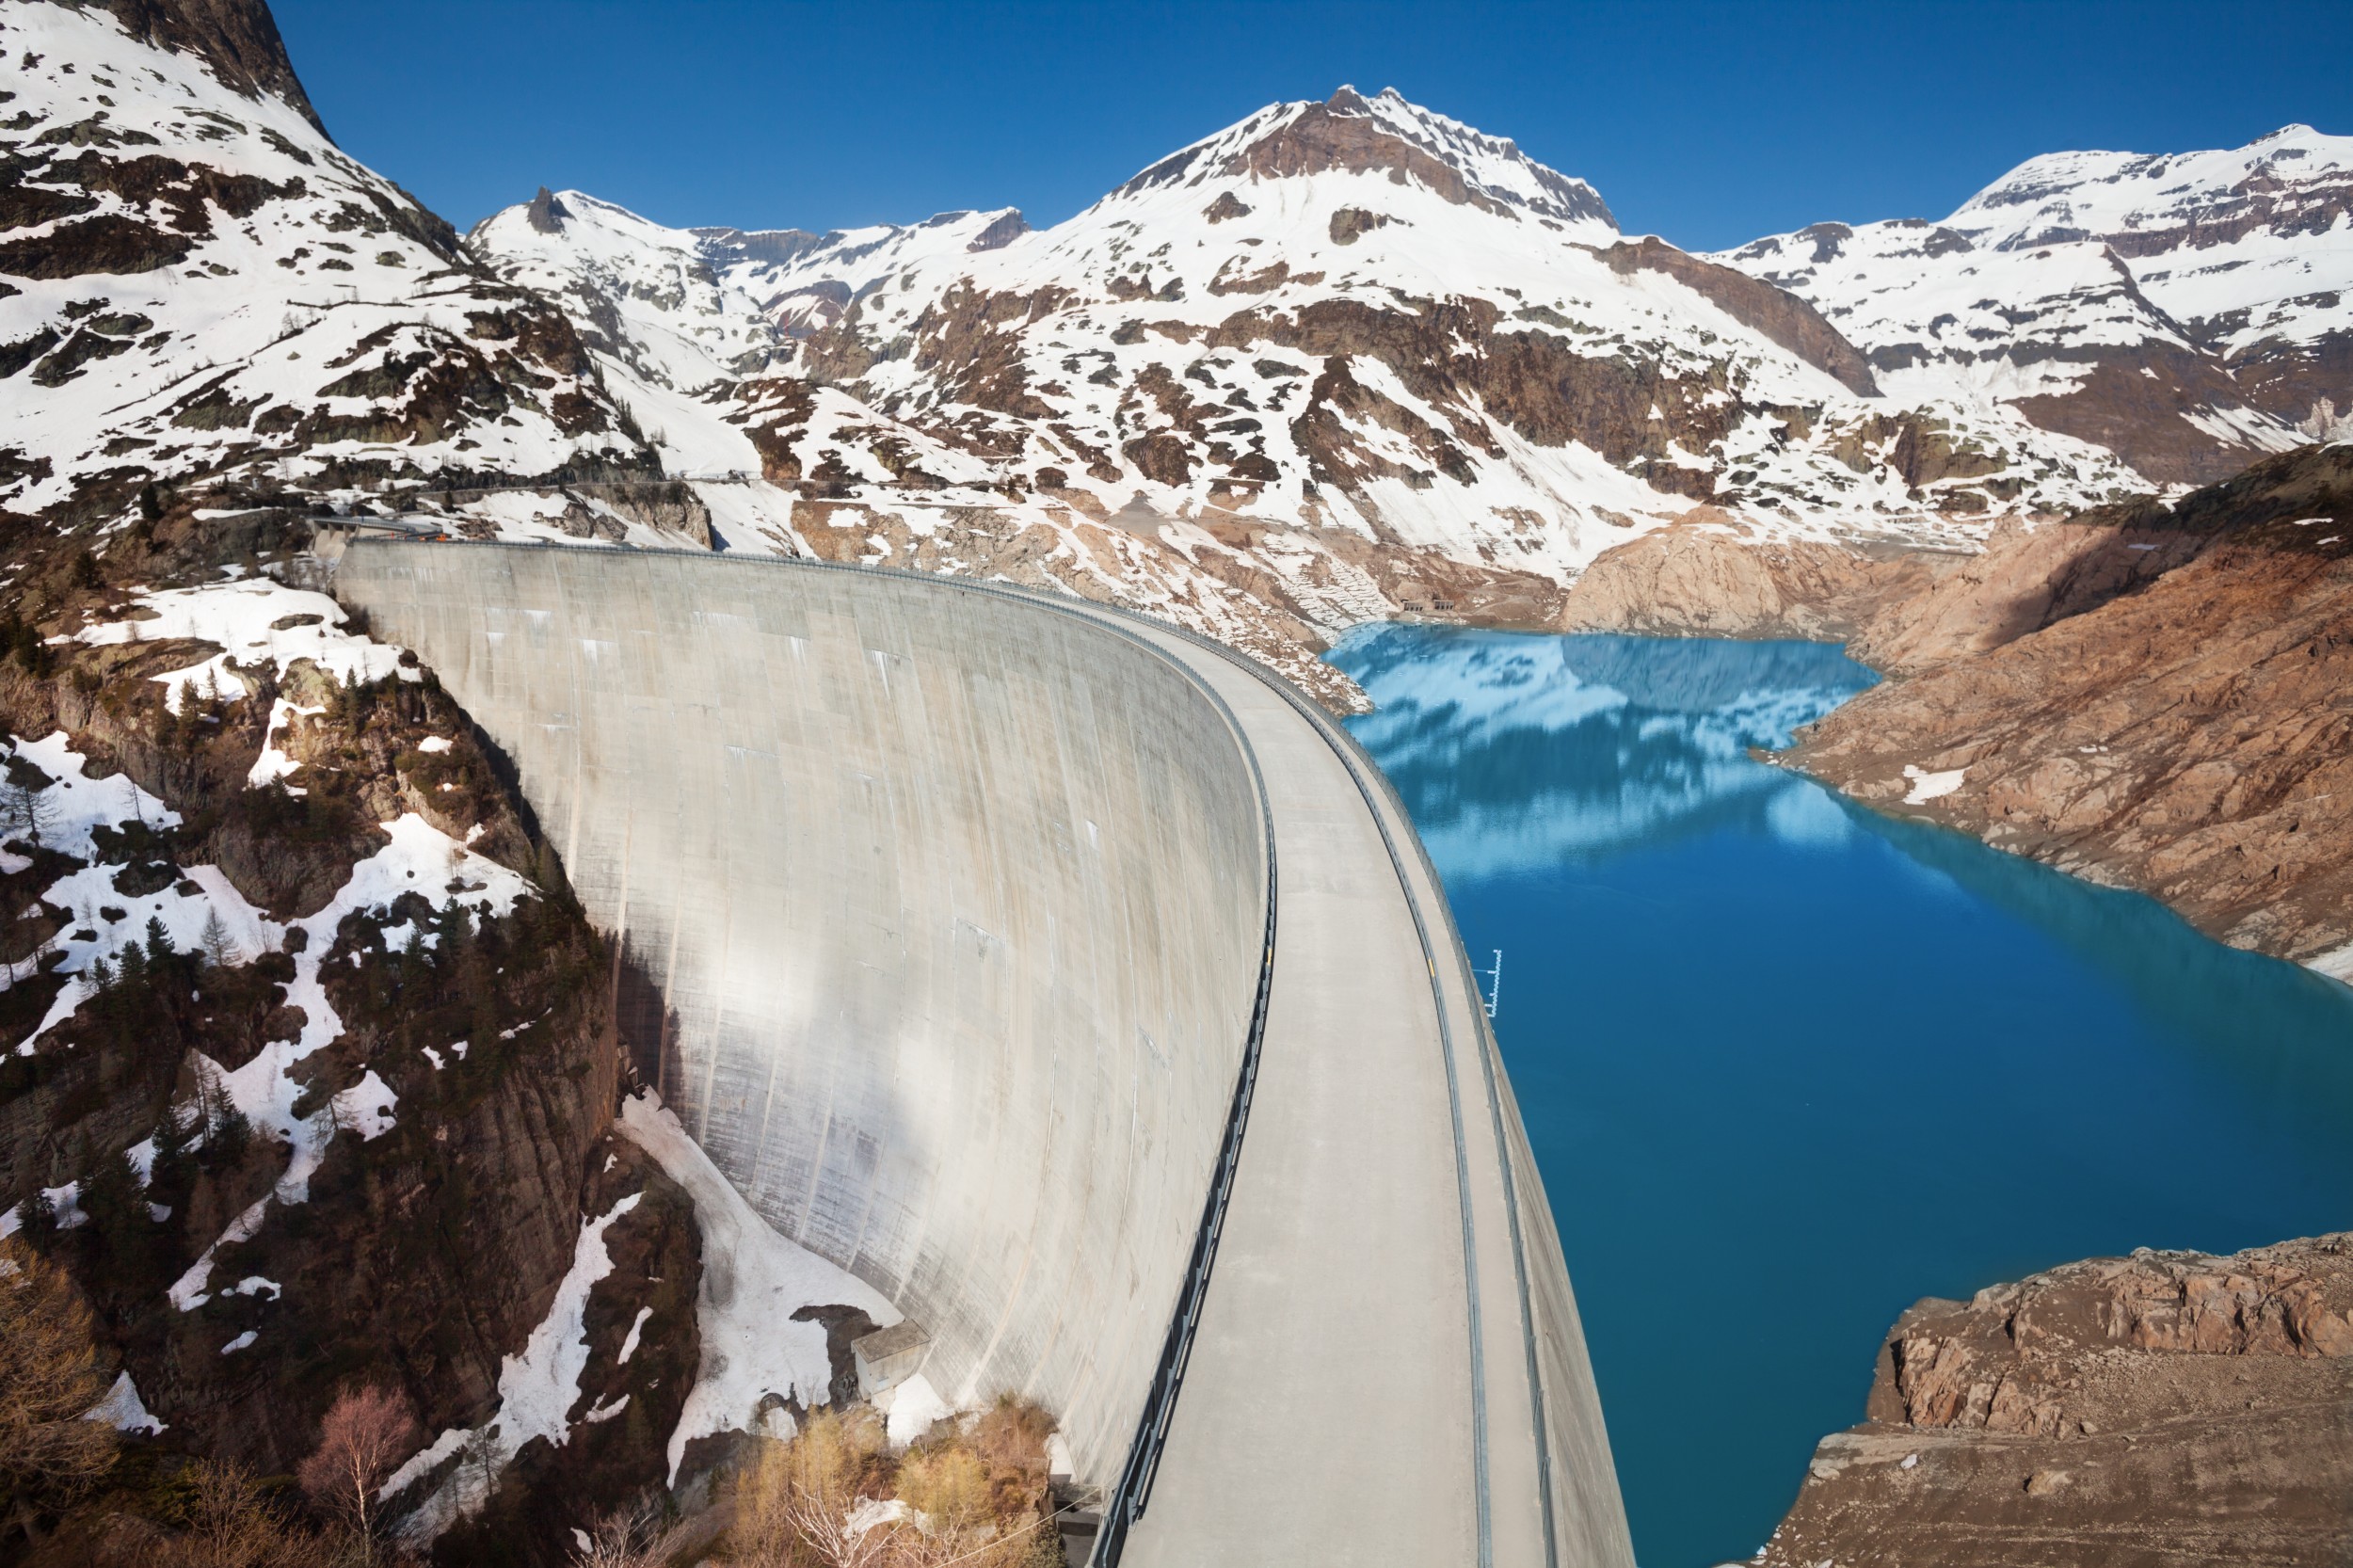 The Lac d’Émosson reservoir in the canton of Valais: hydropower is an important industrial sector for mountain cantons.